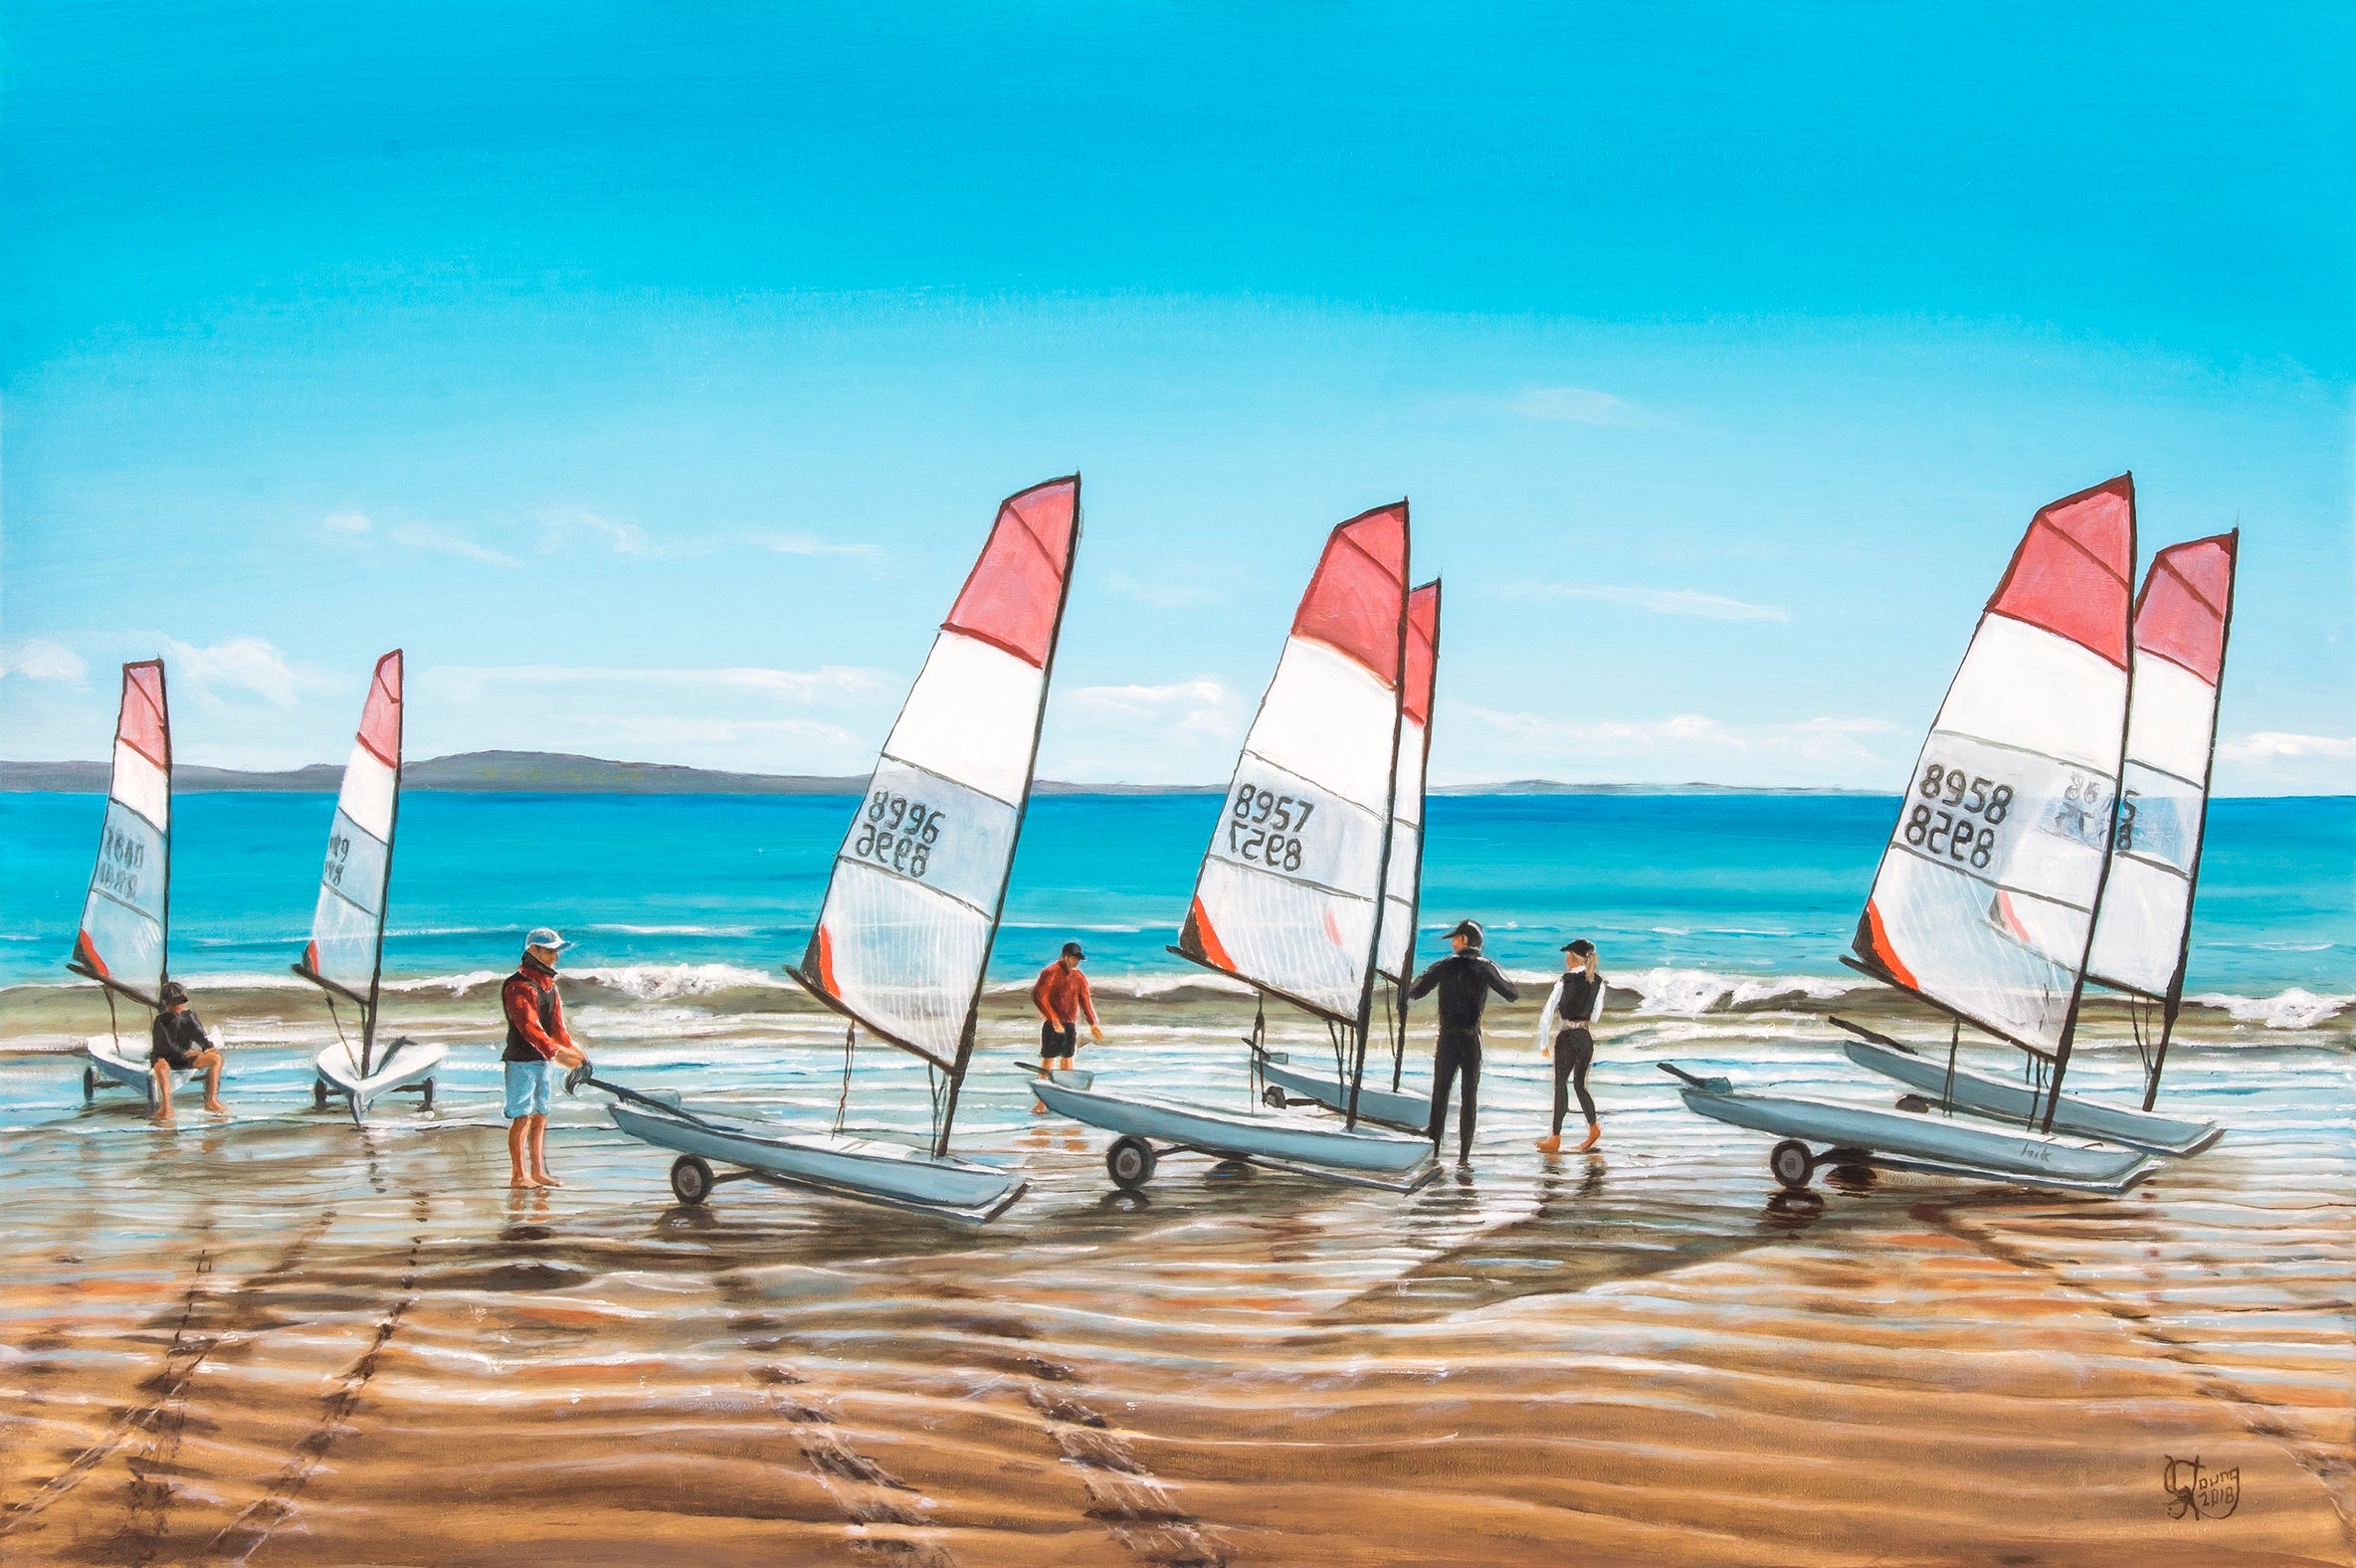 Sails at Manly Beach - grahamyoungartist.com - Original Artwork and Prints by New Zealand Artist Graham Young